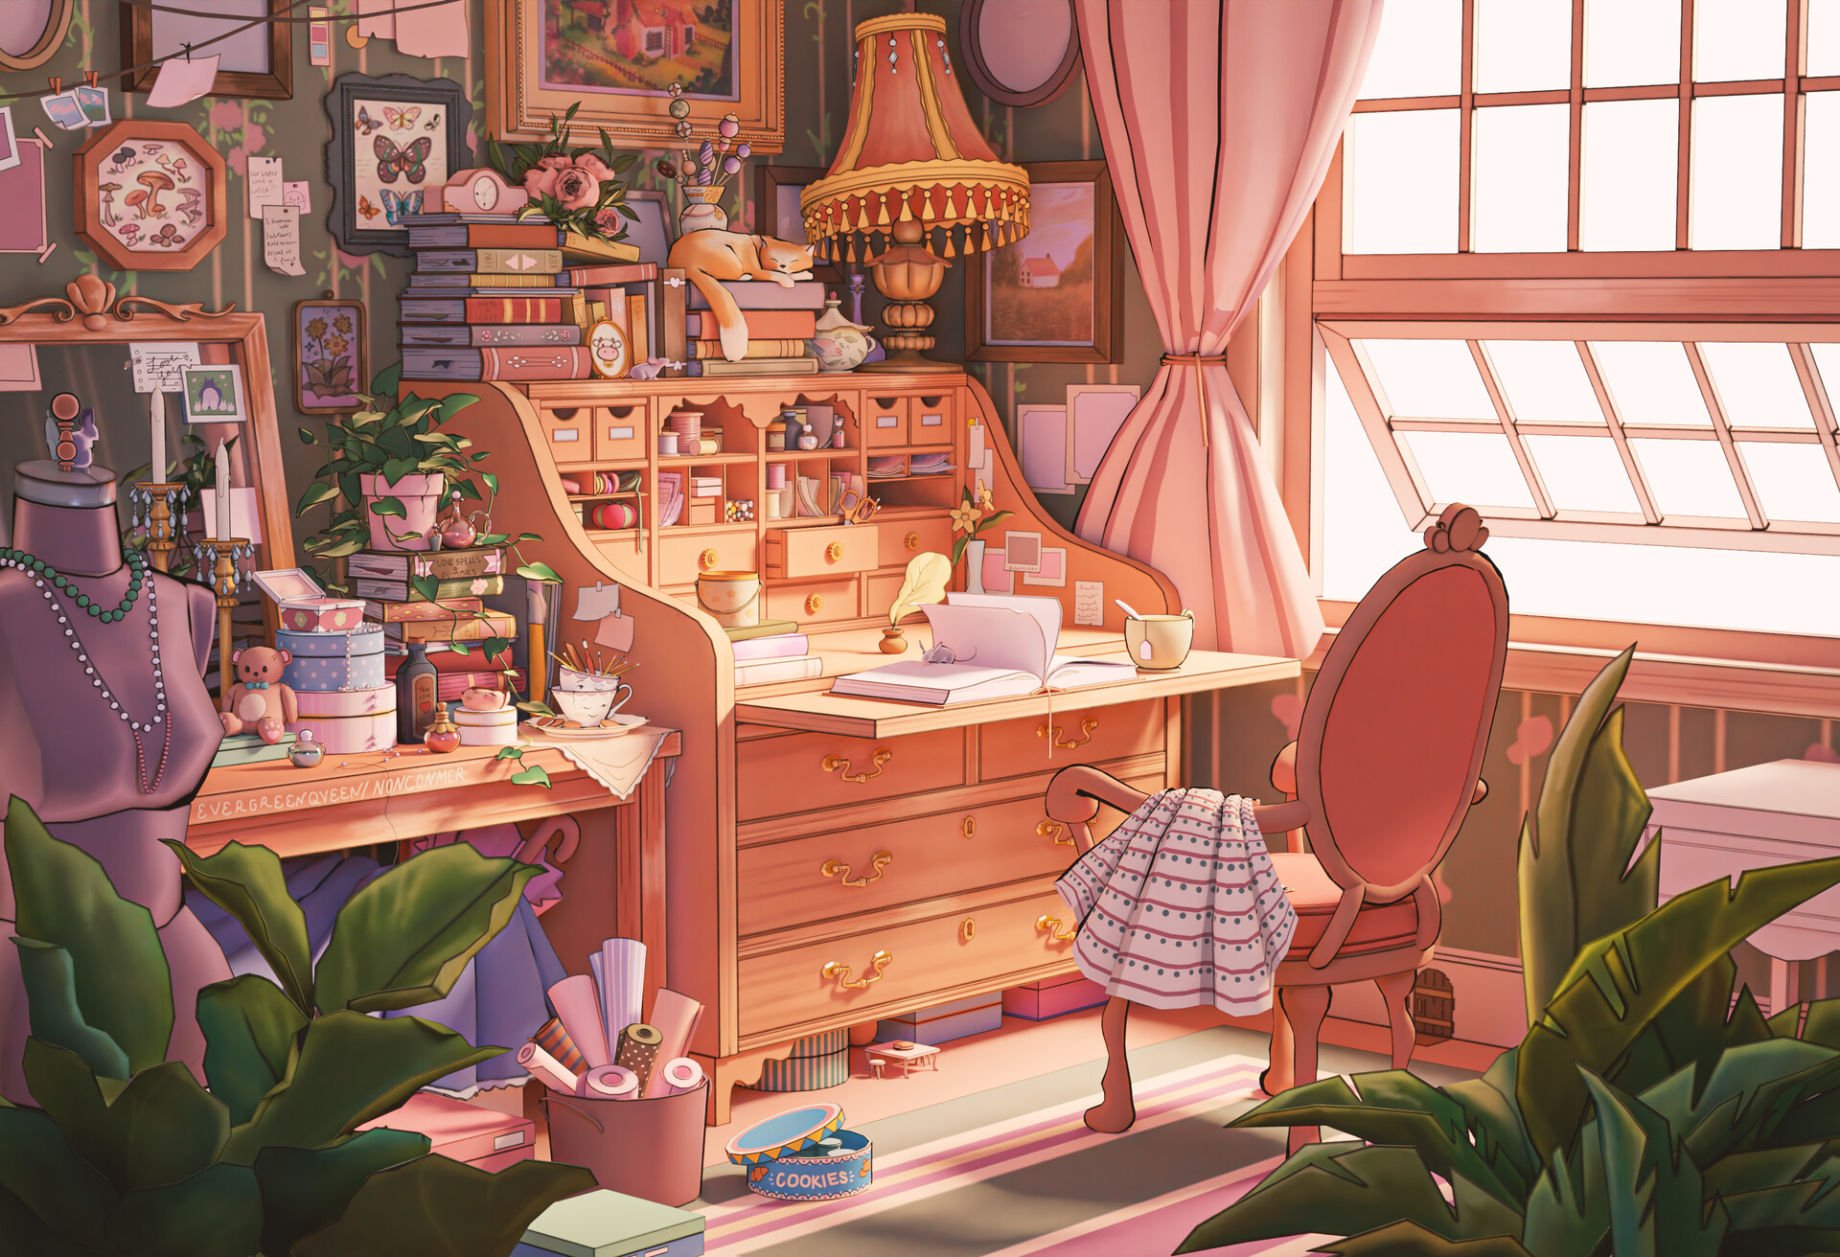 Making a Cozy Stylized Room in Blender and Photohop